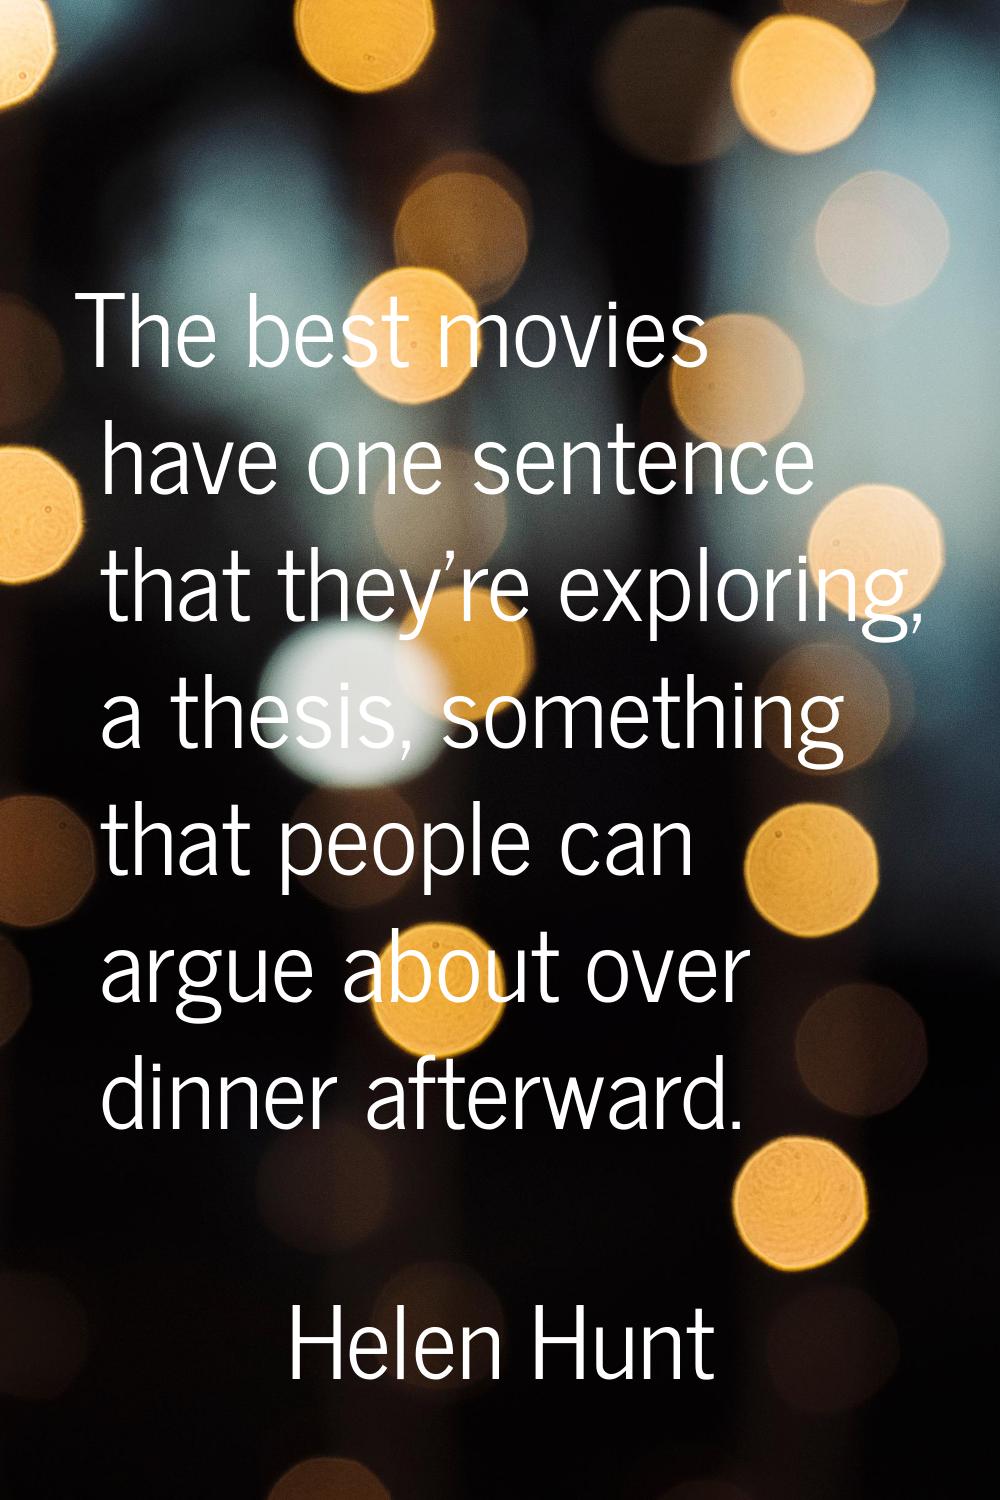 The best movies have one sentence that they're exploring, a thesis, something that people can argue